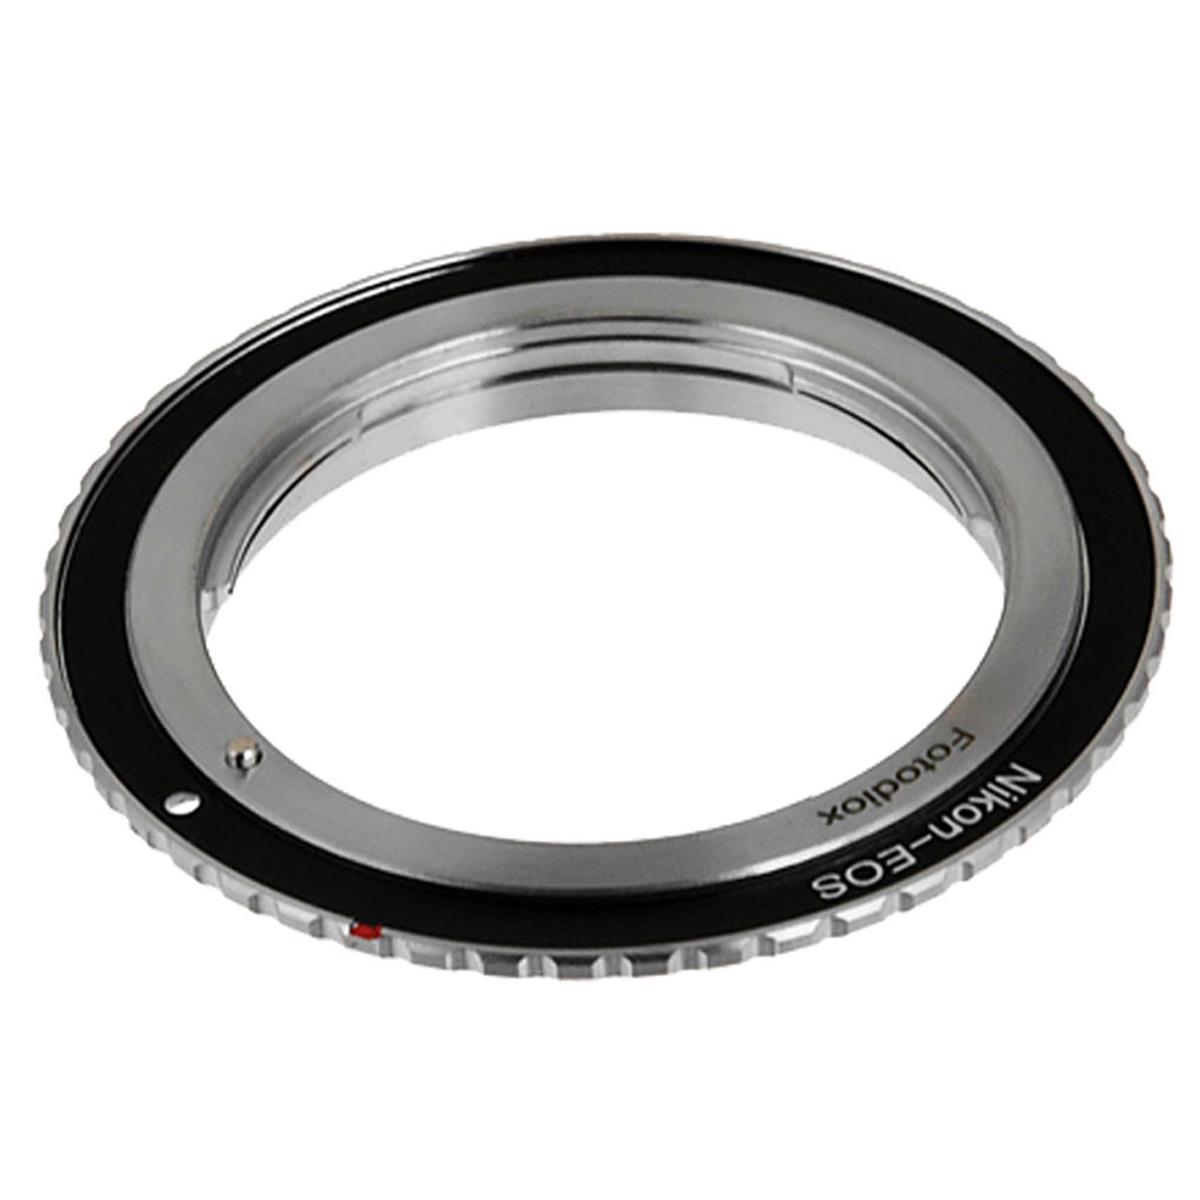 Image of Fotodiox Lens Mount Adapter for Nikon F Mount Lens to Canon EF